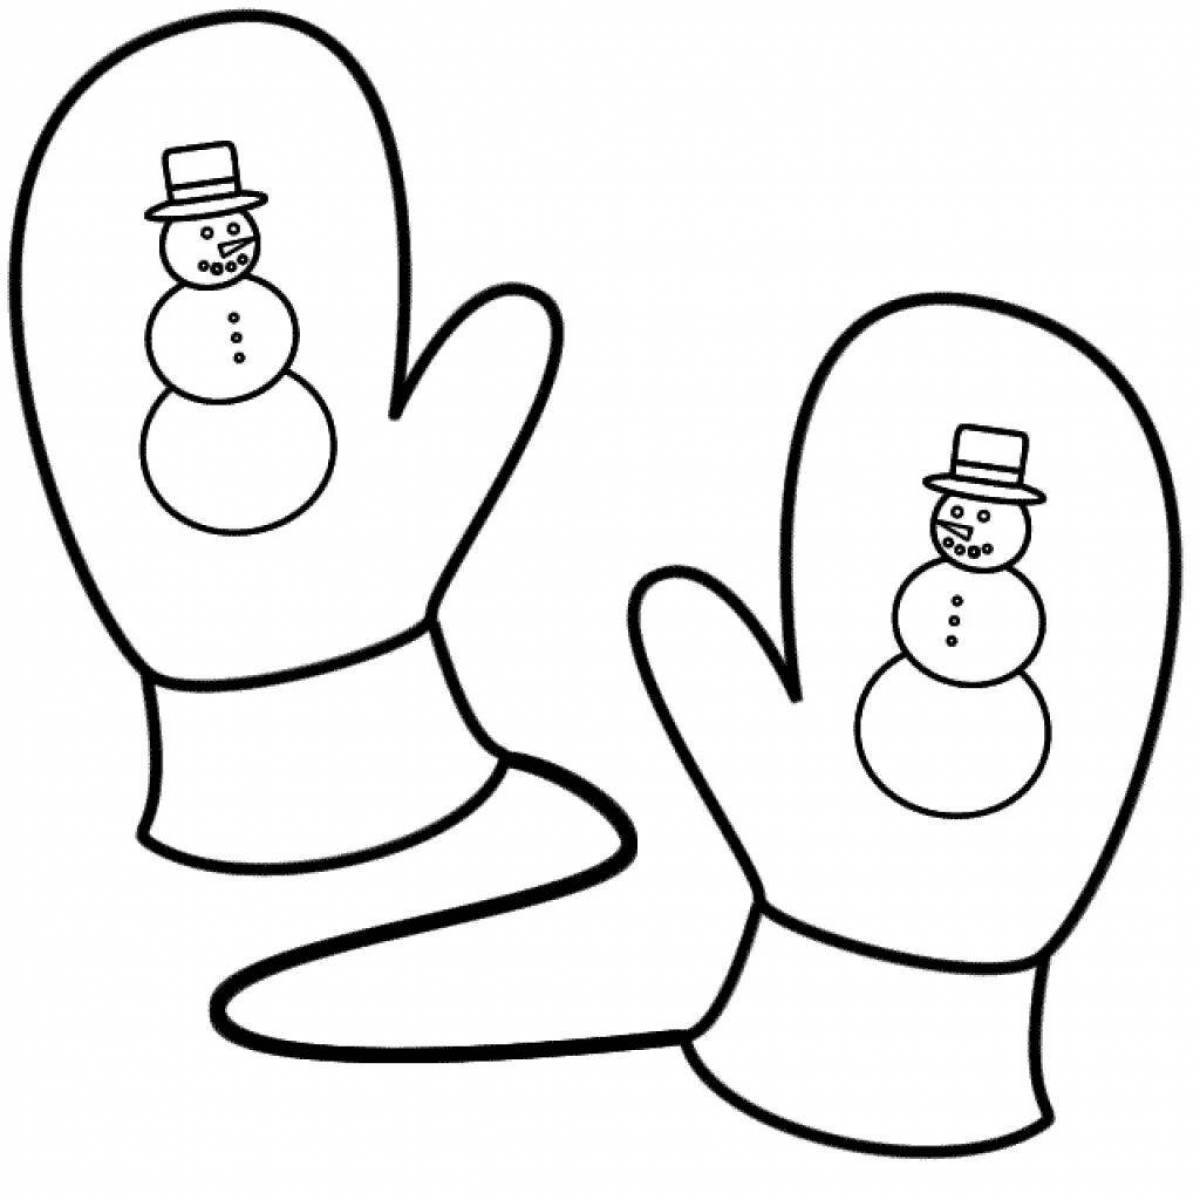 Creative patterned mittens coloring book for kids